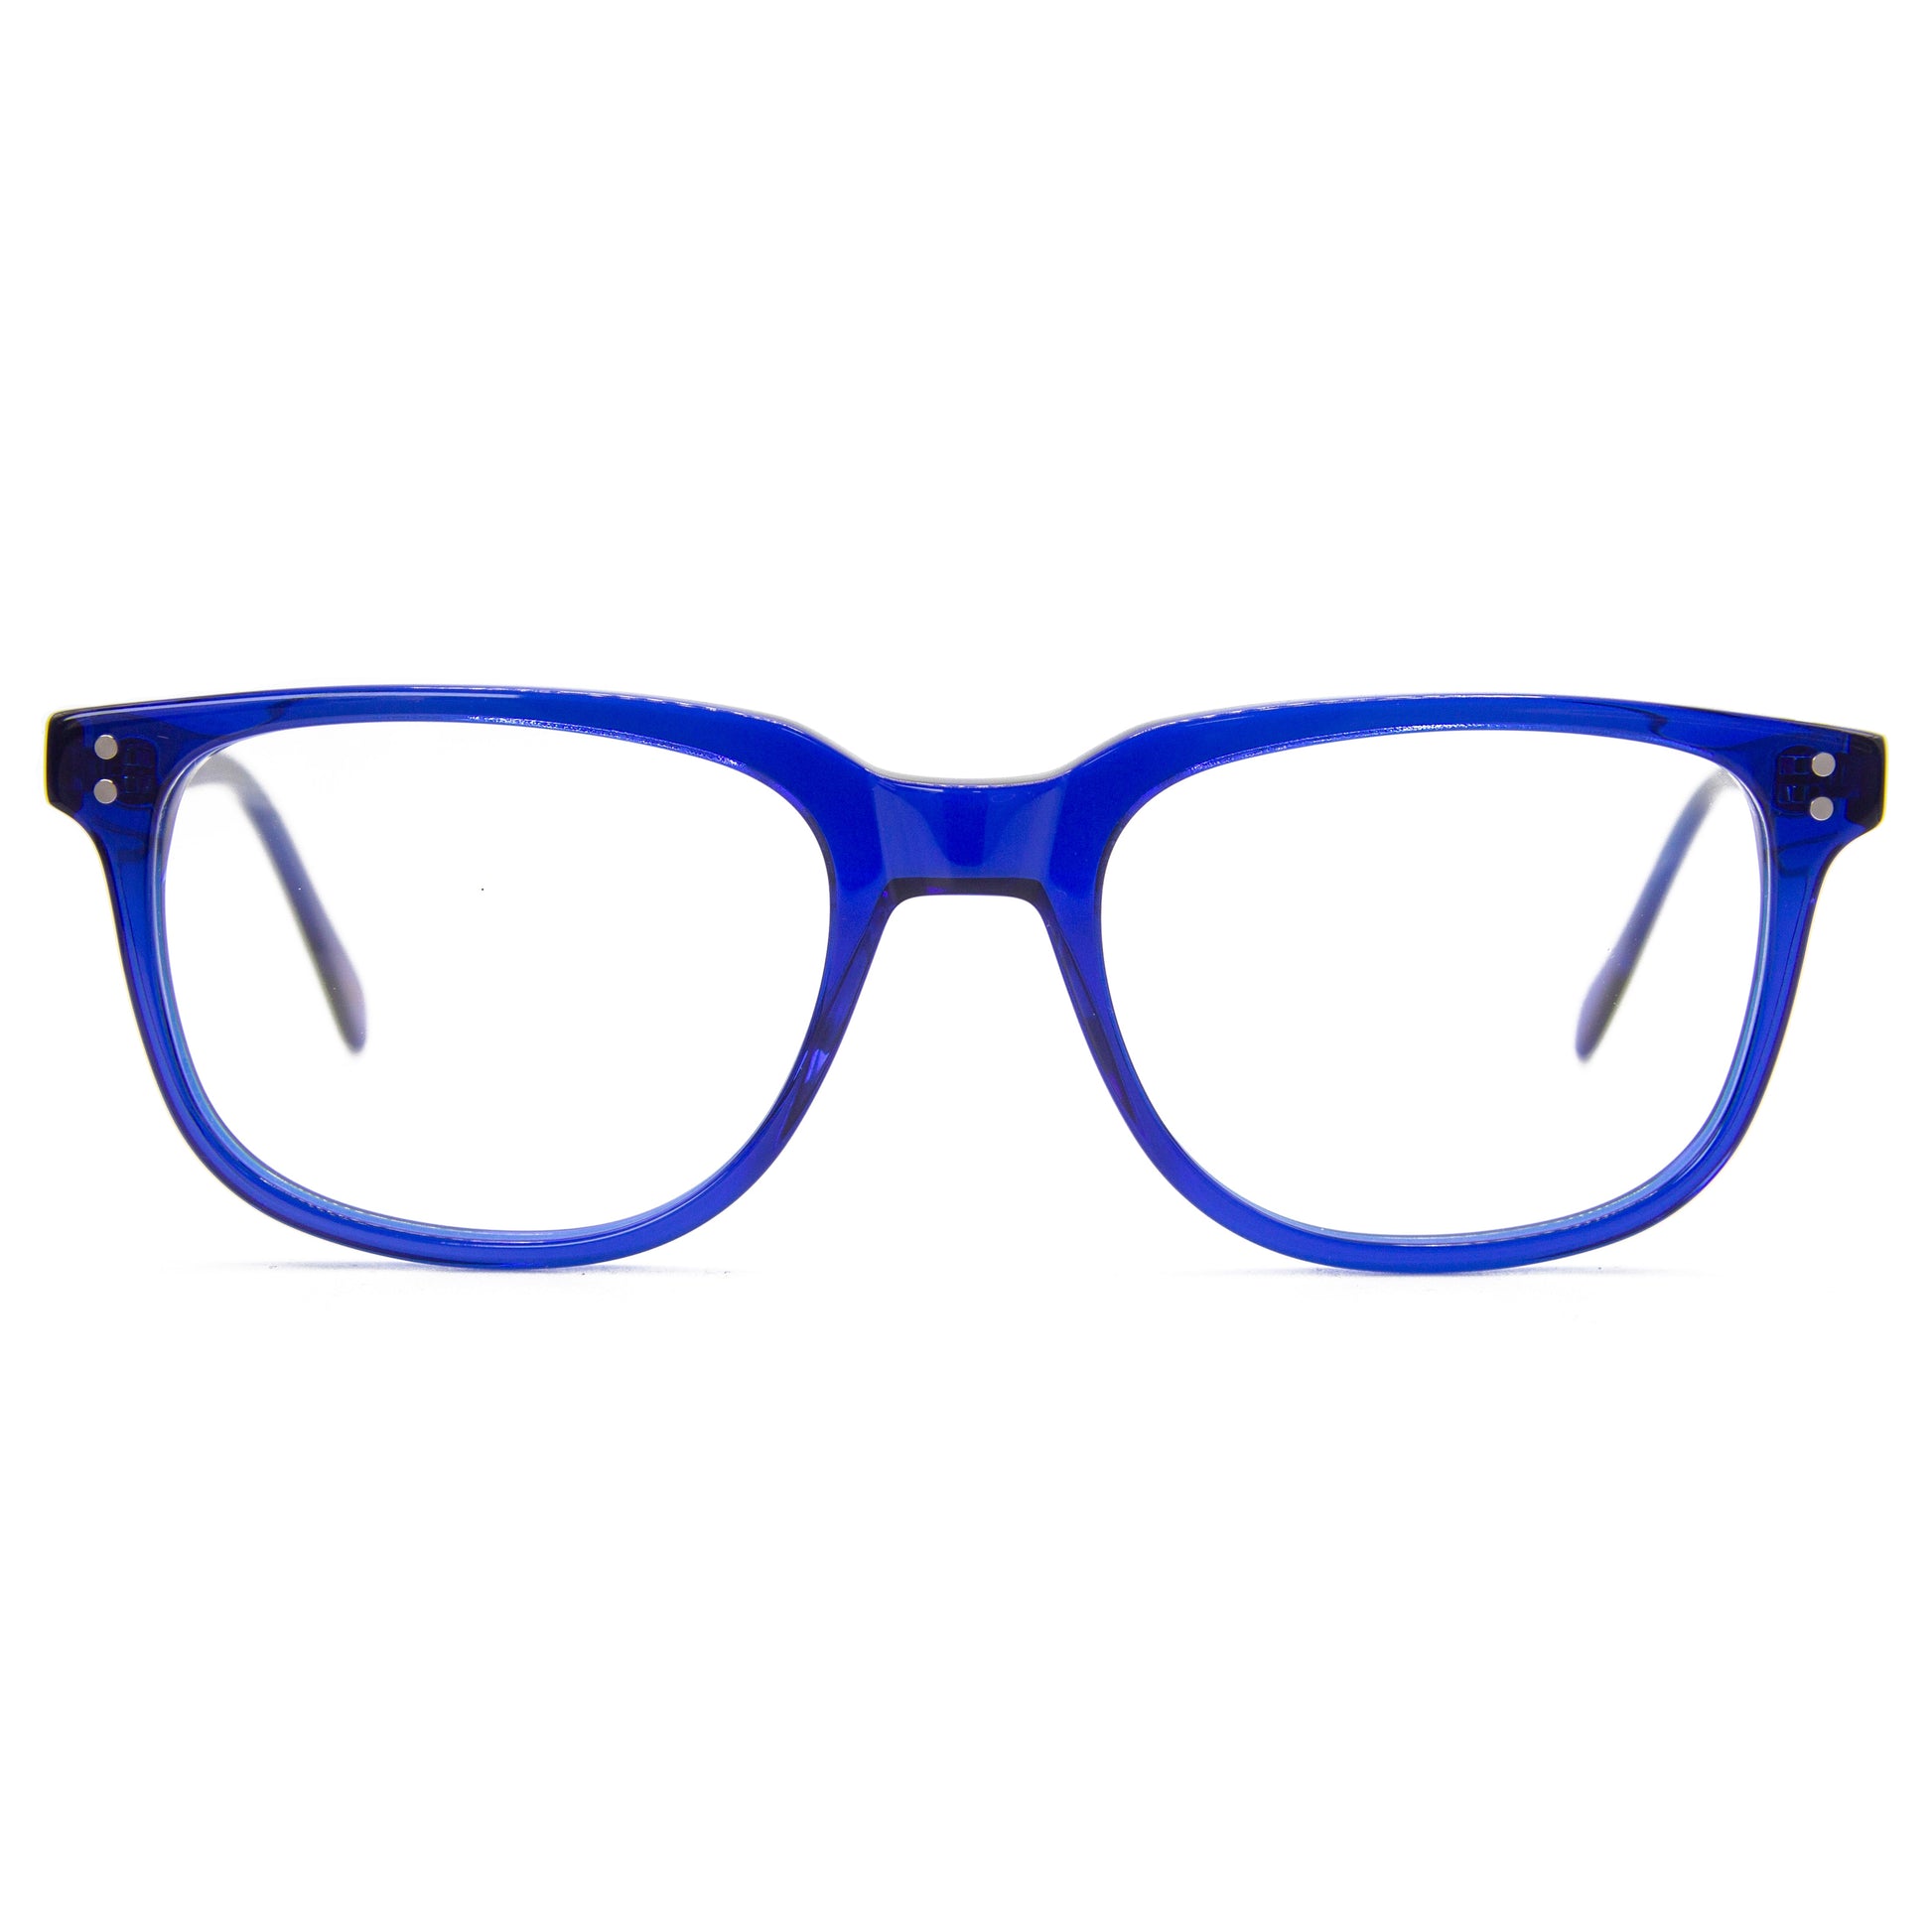 3 brothers - Theo - Navy - Prescription Glasses